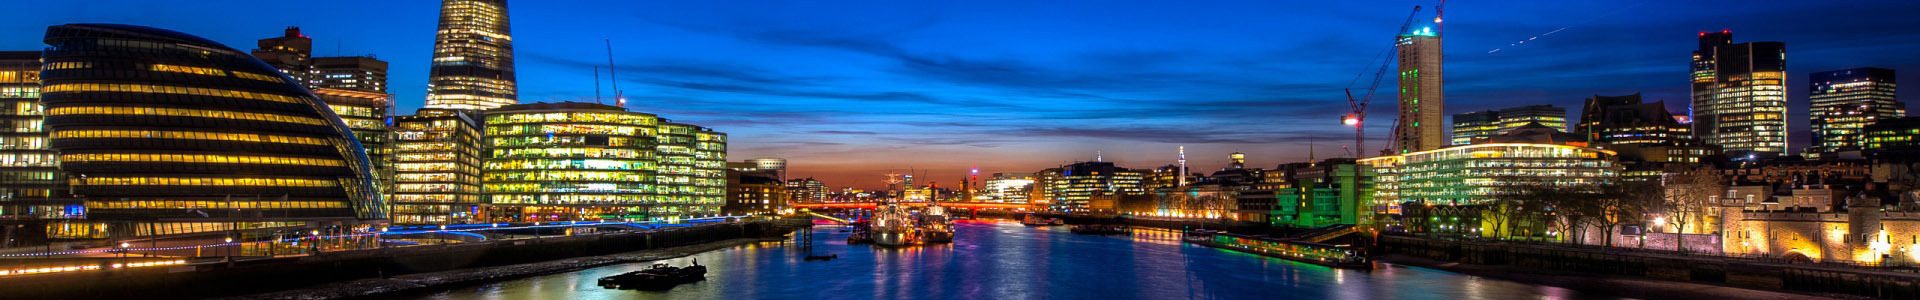 How To Find High Quality Video Production in London